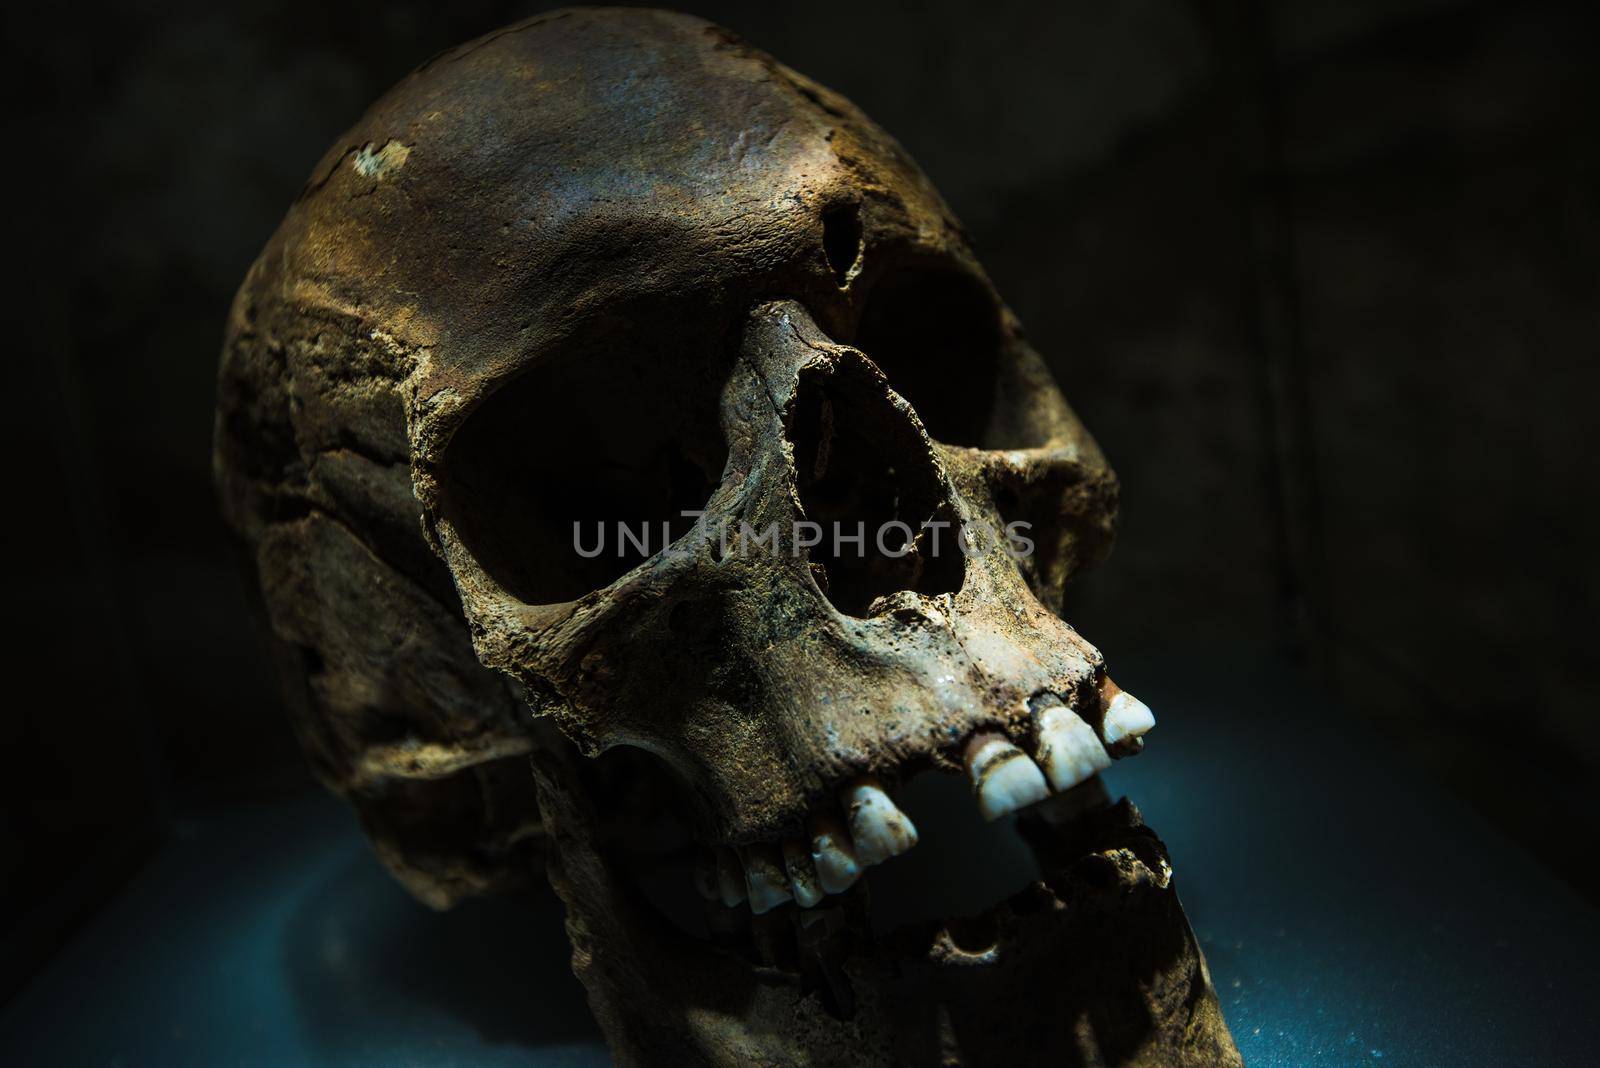 Ancient Human Skull in Dark Place Closeup Photo.  by welcomia